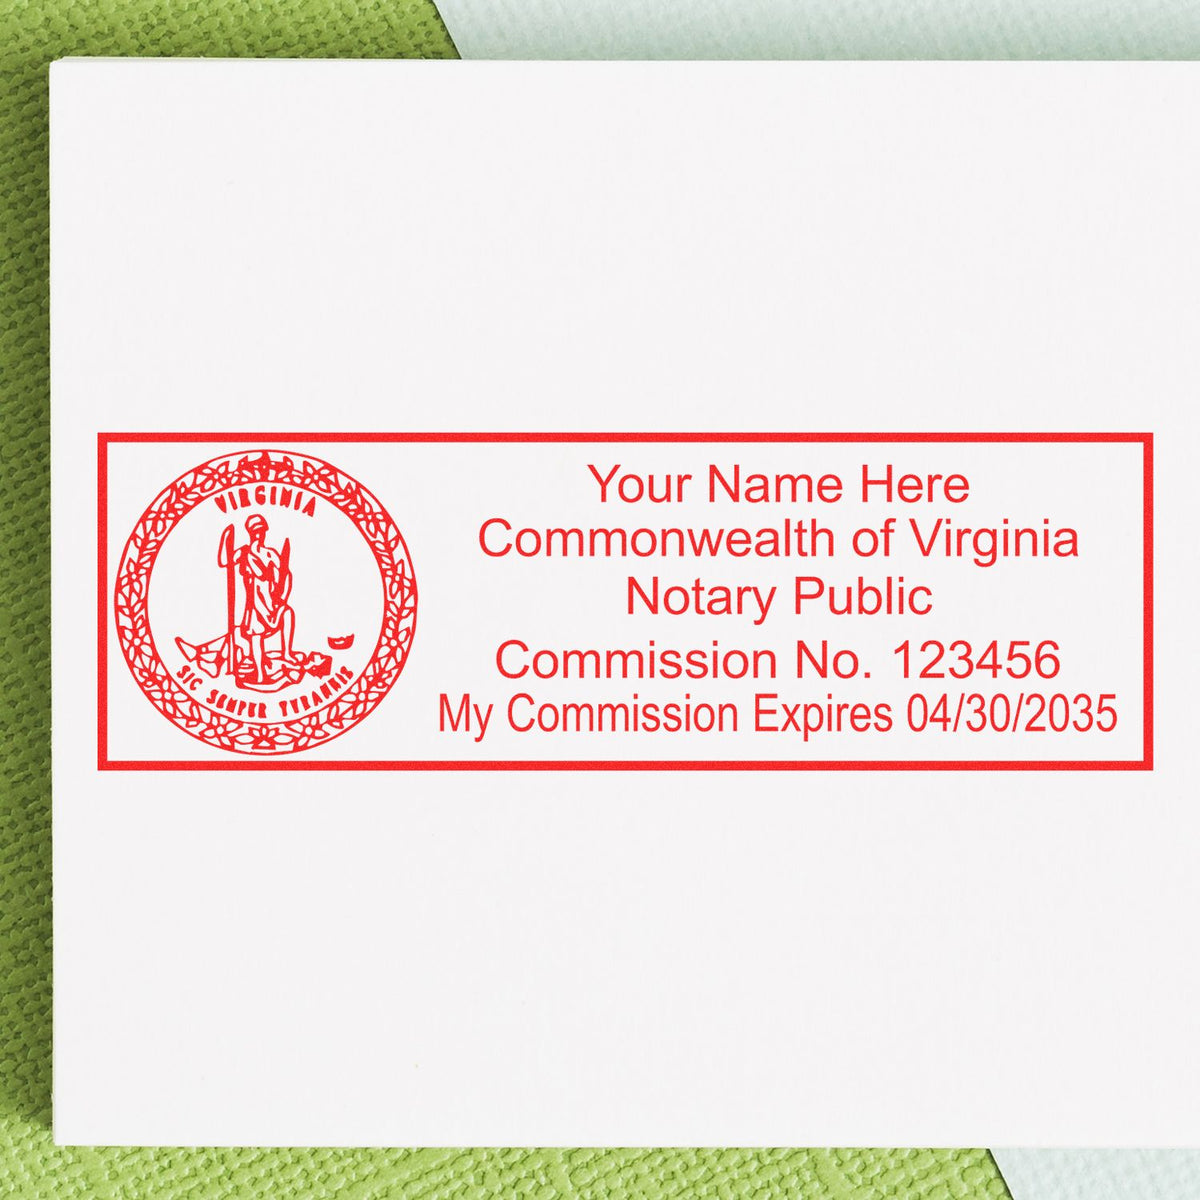 The Self-Inking State Seal Virginia Notary Stamp stamp impression comes to life with a crisp, detailed photo on paper - showcasing true professional quality.